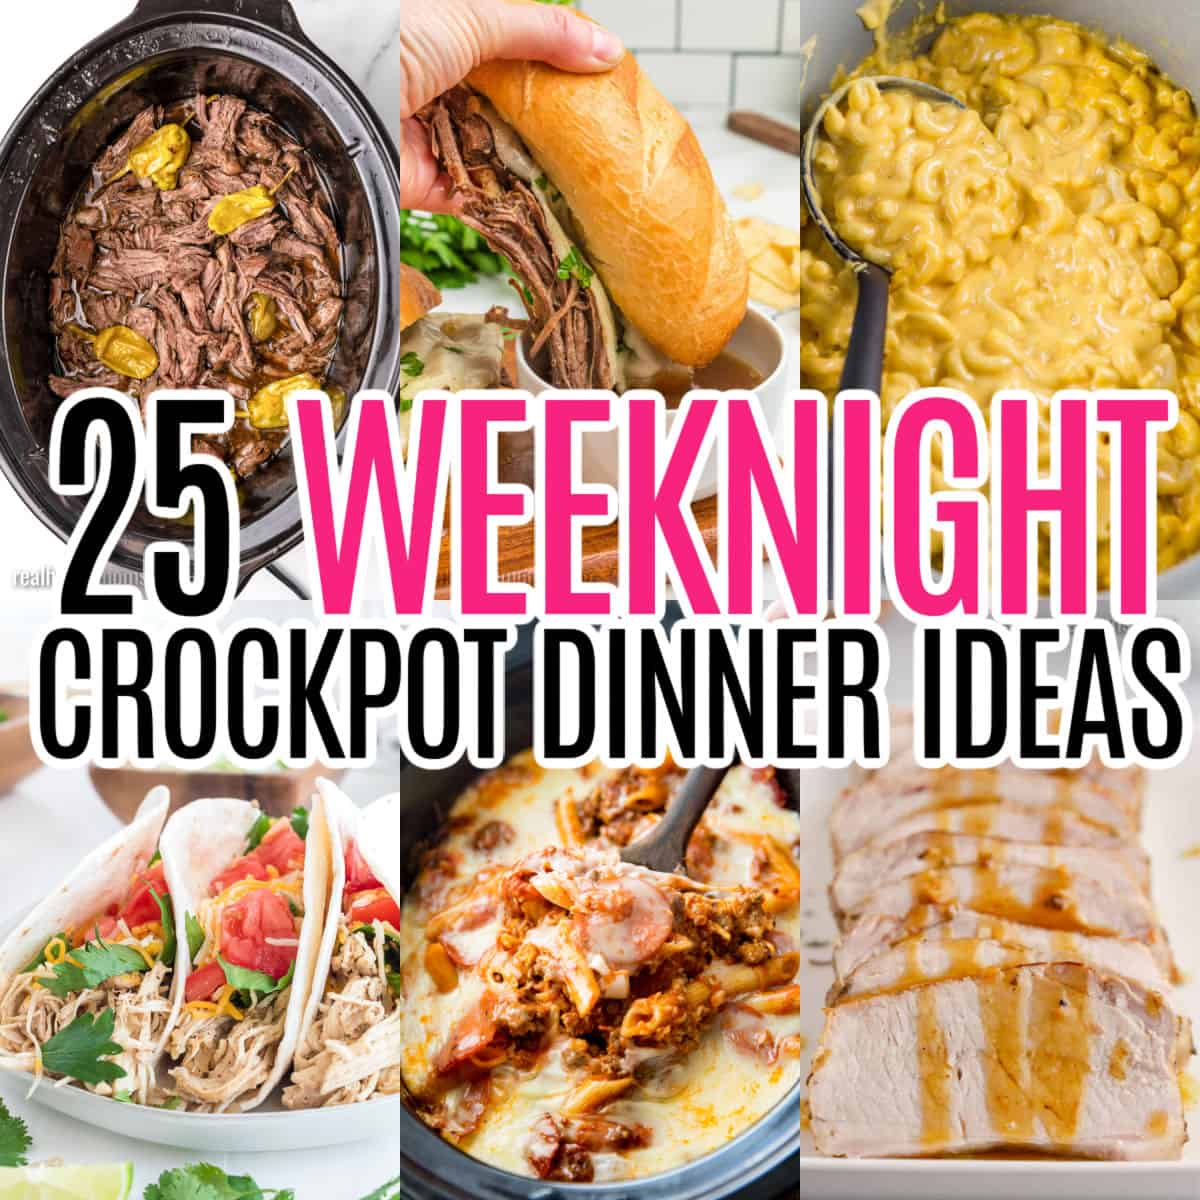 square collage of weeknight crockpot dinner ideas with text overlay